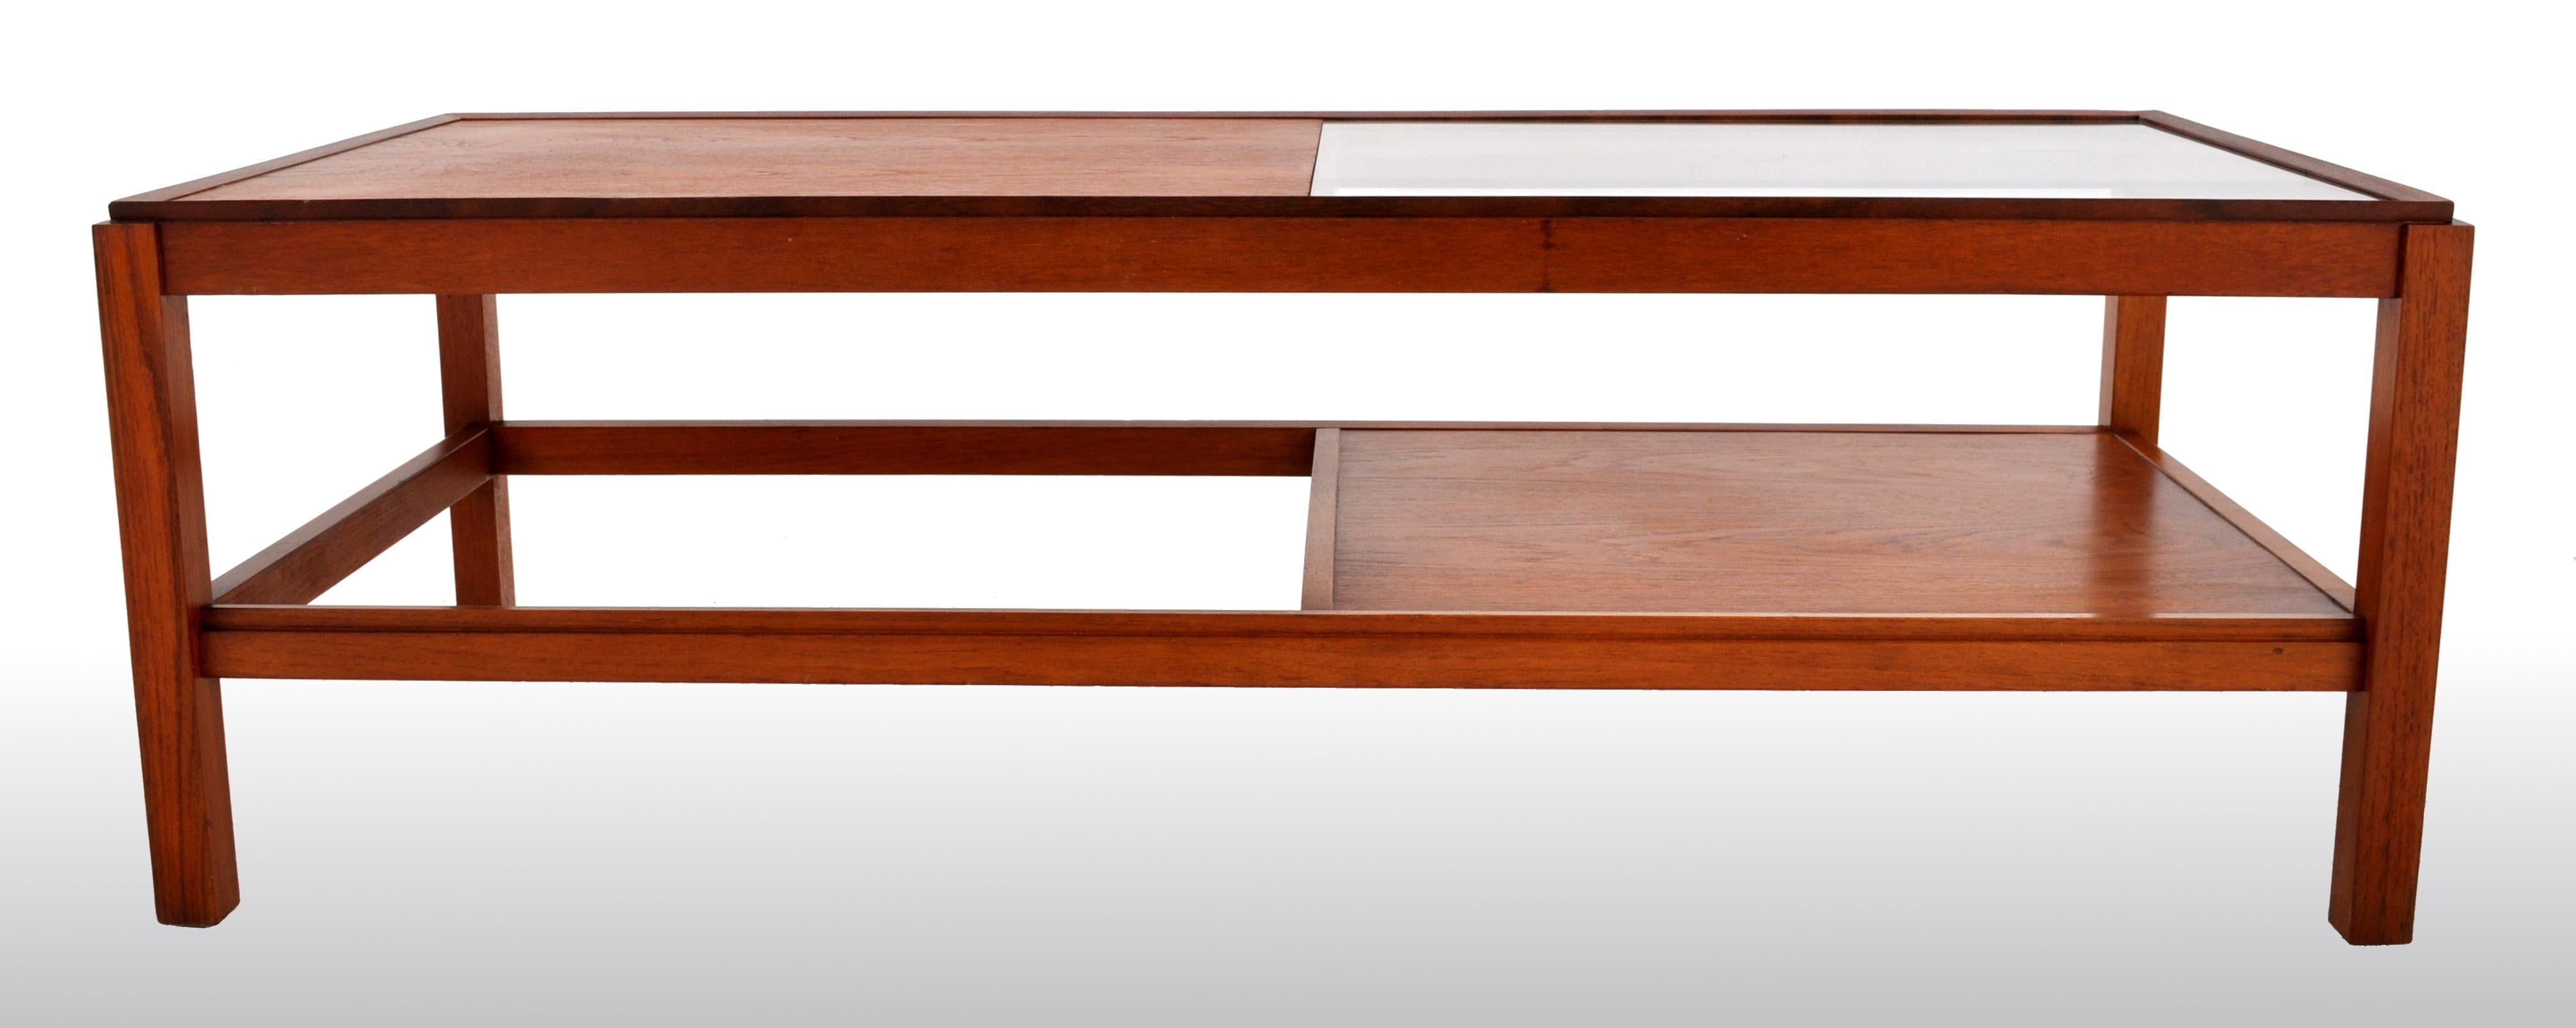 Mid-Century Modern Danish teak coffee table, 1960s. The twin-tiered table of large form having a glass inset to the top and having a secondary tier underneath. The table made of solid figured teak and raised on square legs.